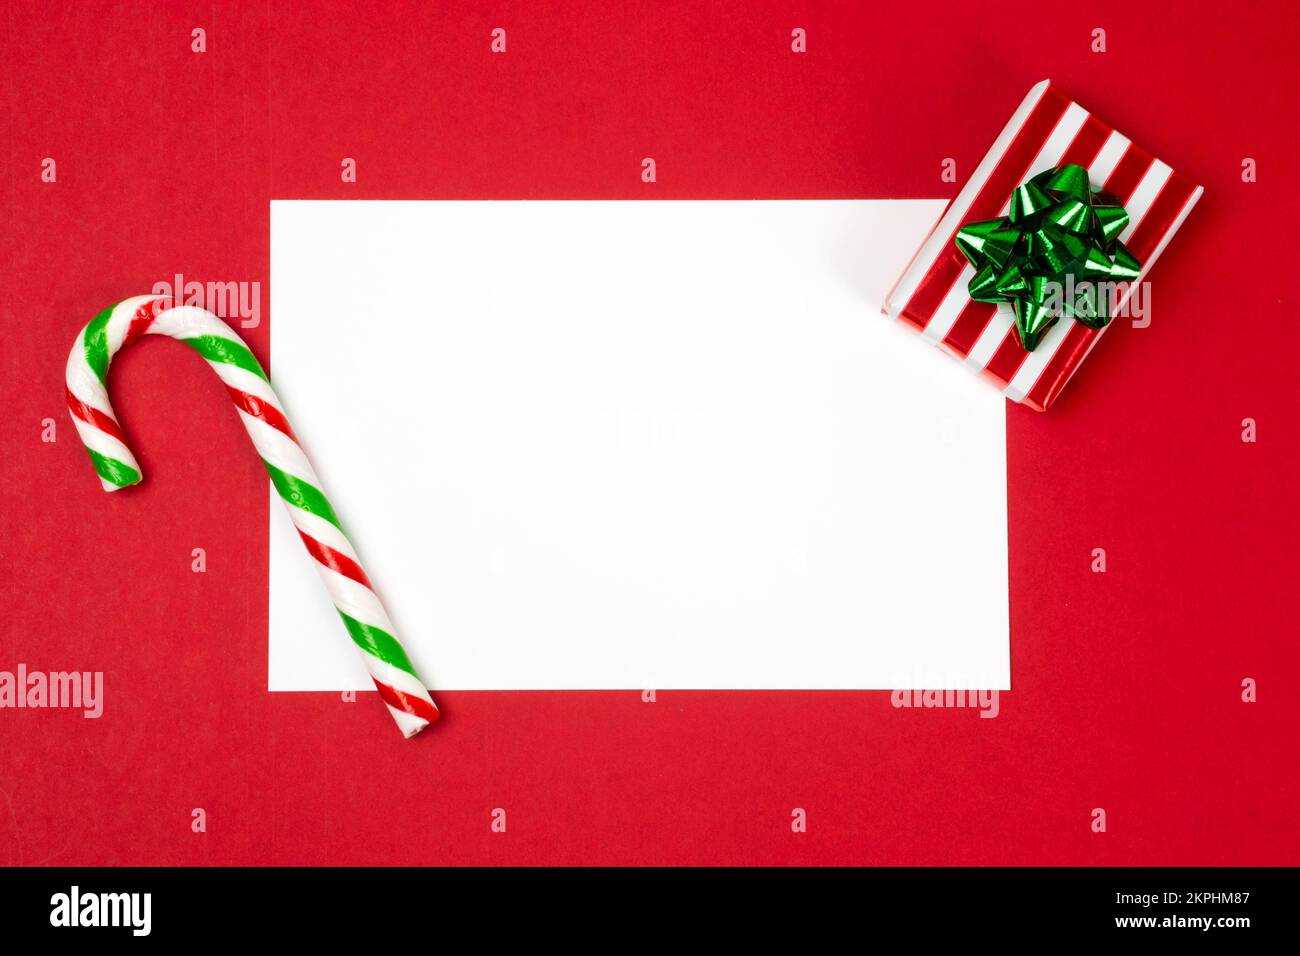 https://c8.alamy.com/comp/2KPHM87/christmas-letter-mock-up-blank-white-empty-page-on-red-background-with-a-red-and-green-candy-cane-and-a-gift-box-postcard-greetings-and-thank-you-2KPHM87.jpg